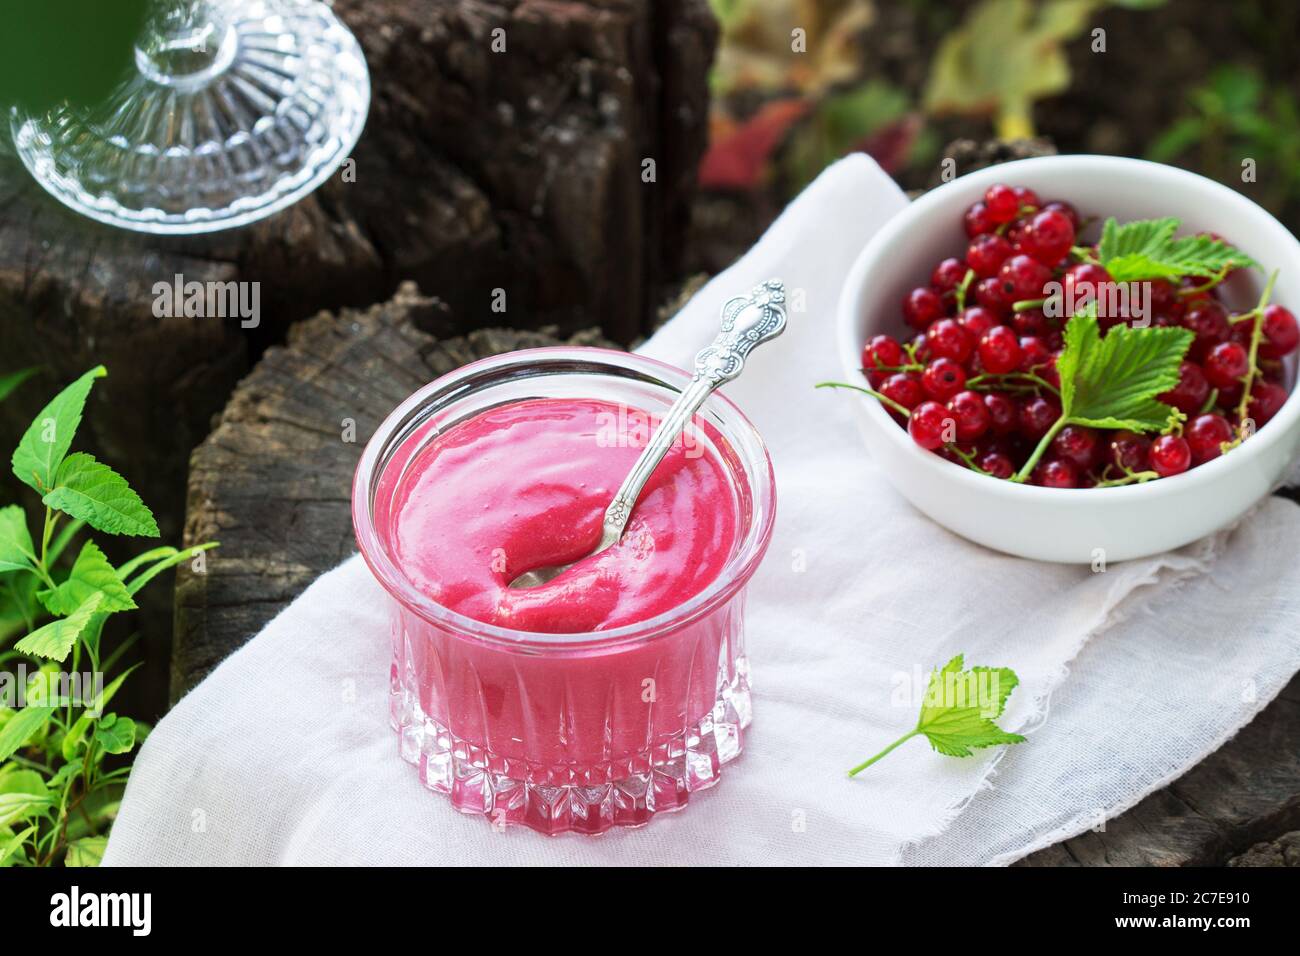 Red currant custard and currant berries on old stumps in the garden. Stock Photo